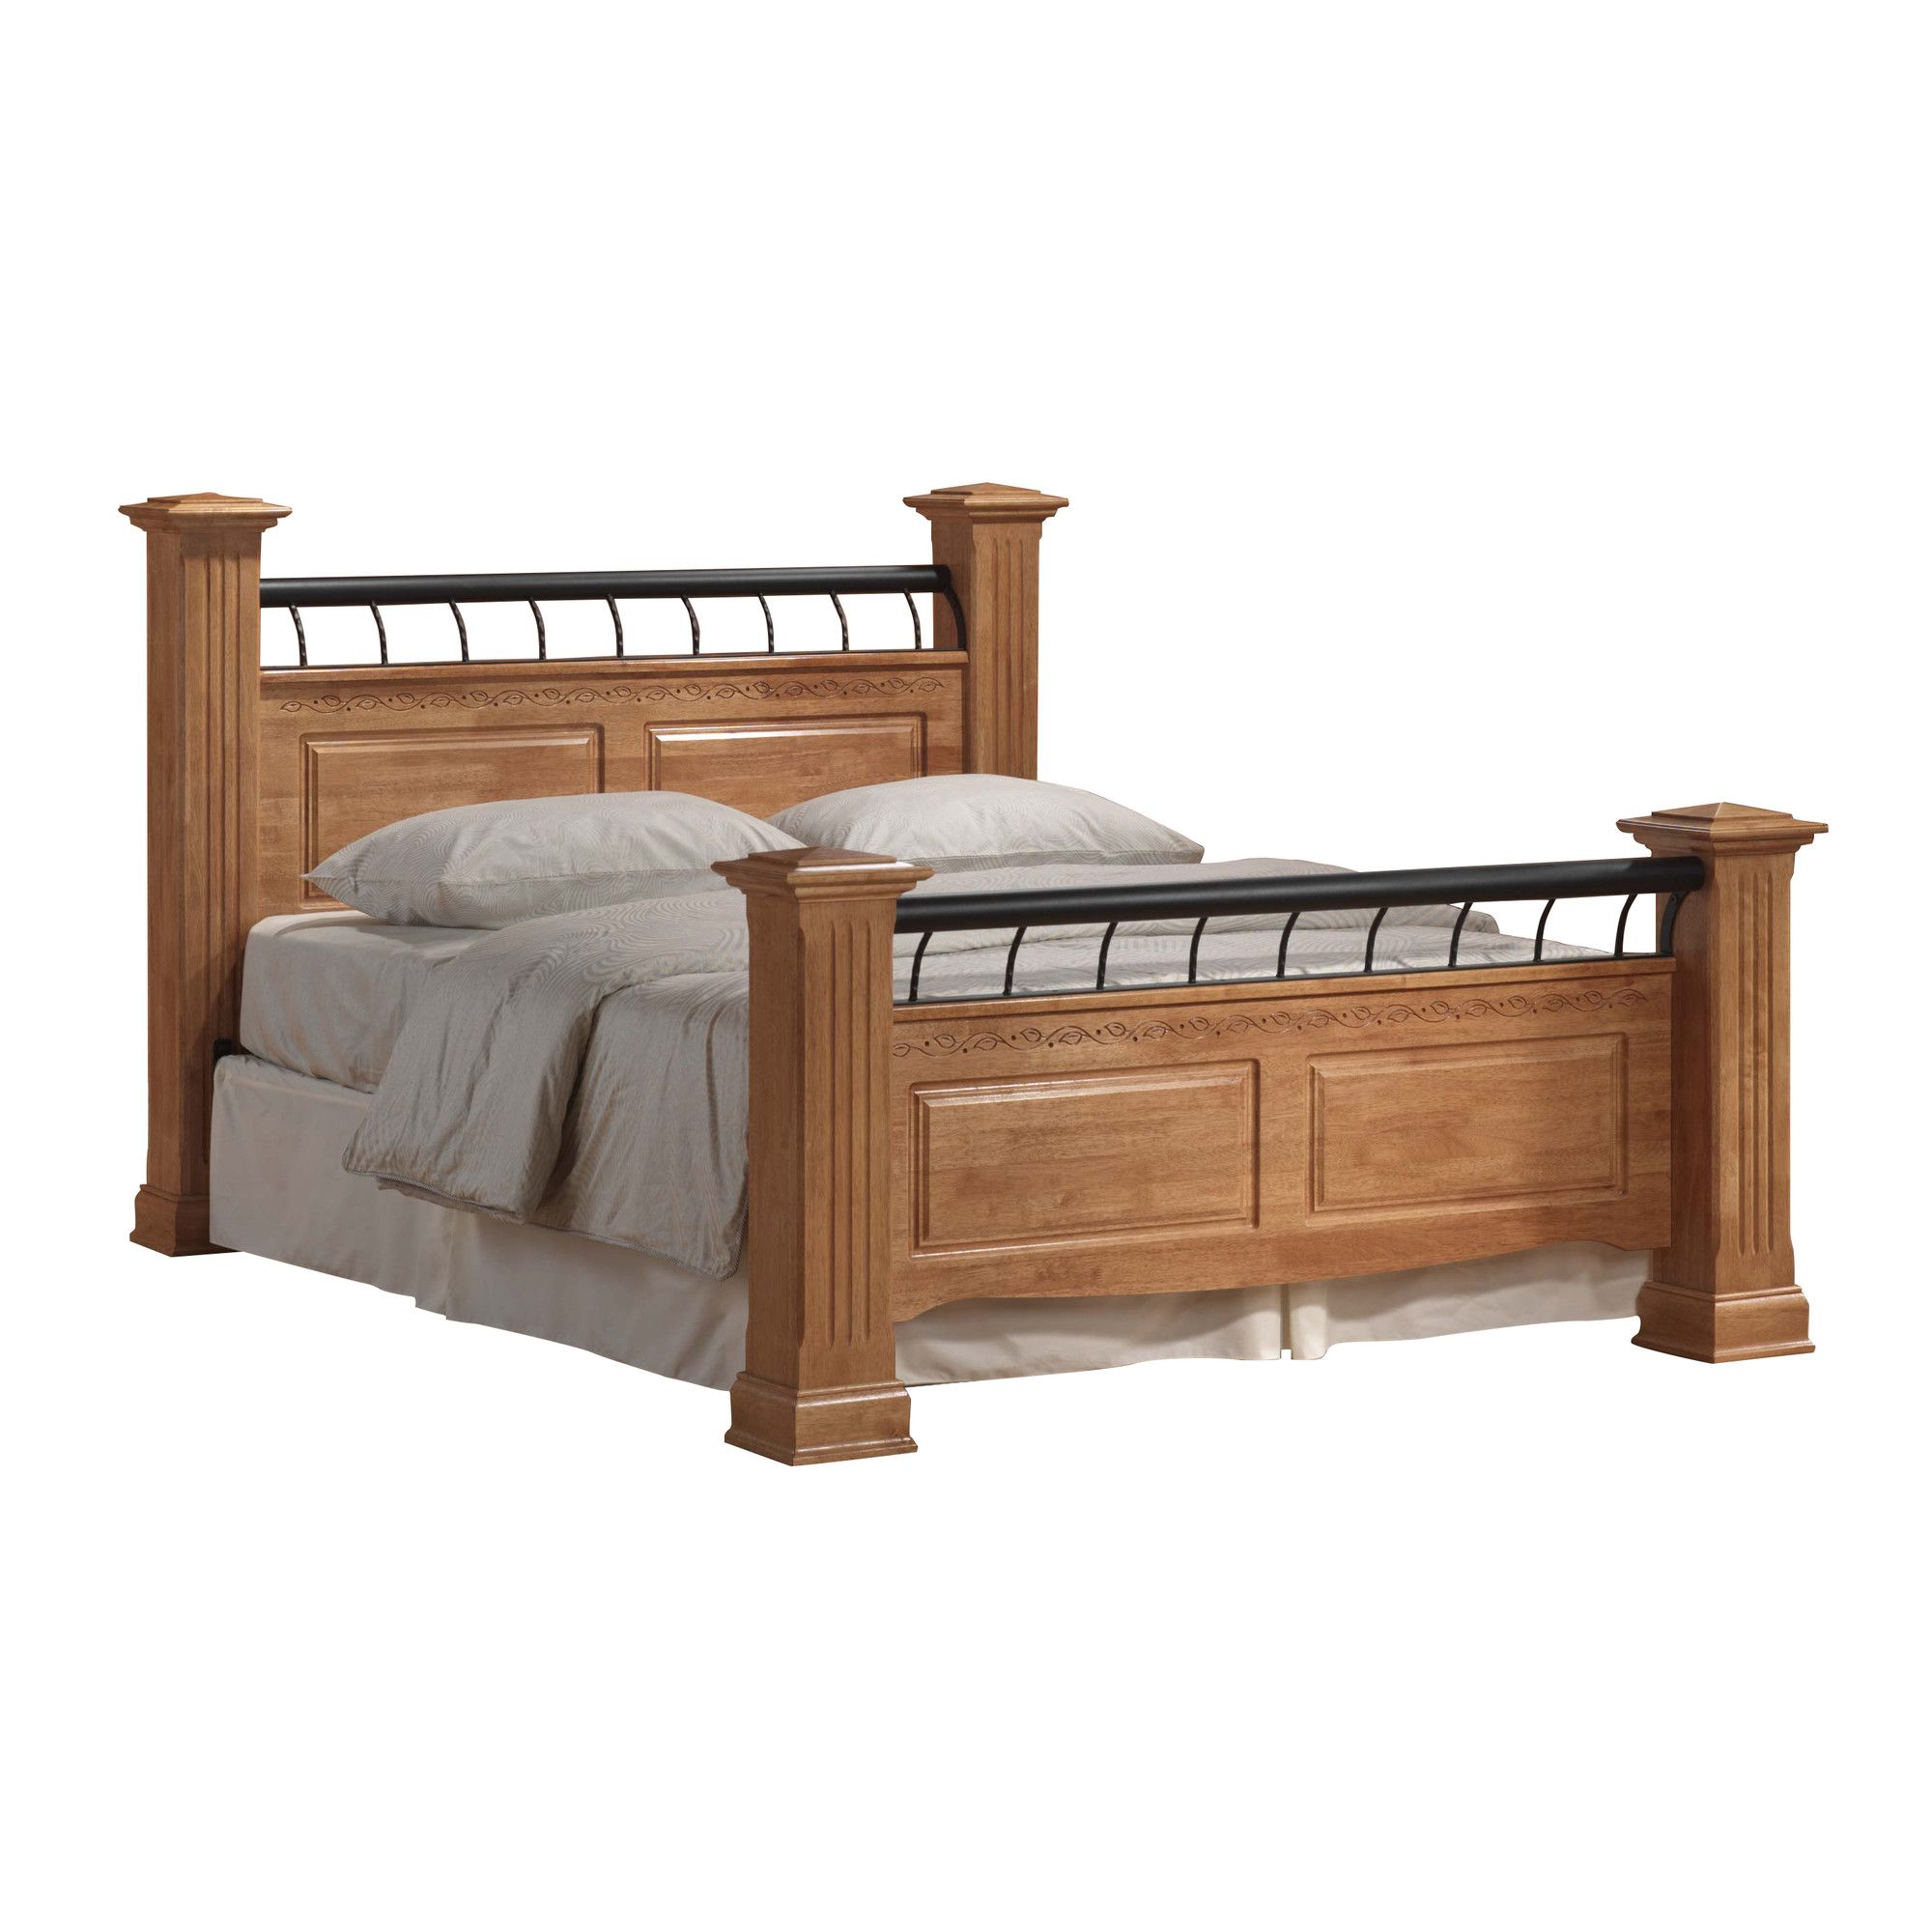 Ideal Furniture Rolo Bed - King at Tesco Direct